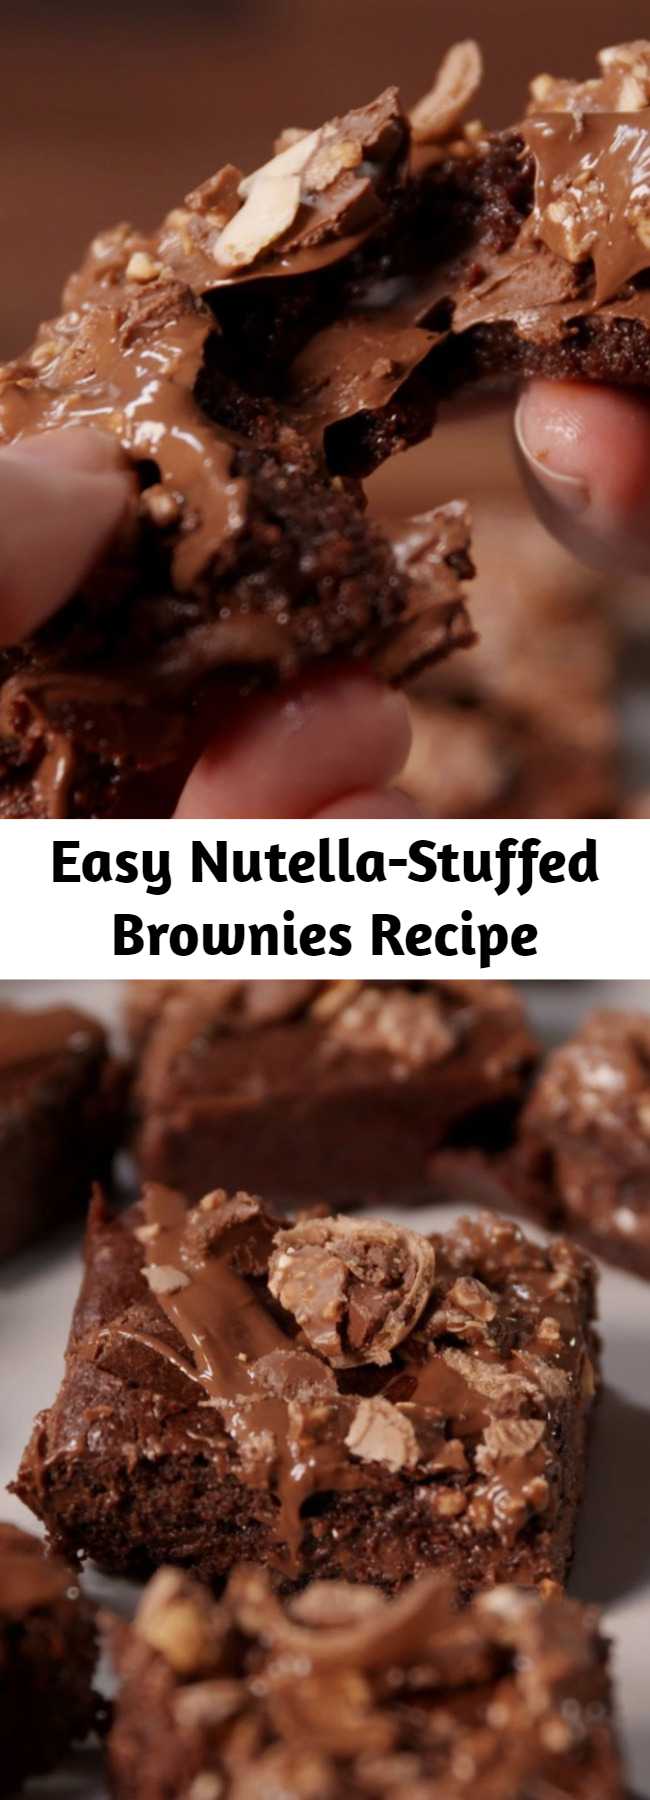 Easy Nutella-Stuffed Brownies Recipe - Looking for an easy brownie recipe? This Nutella-Stuffed Brownies Recipe is the best. We've died and gone to chocolate-hazelnut heaven.